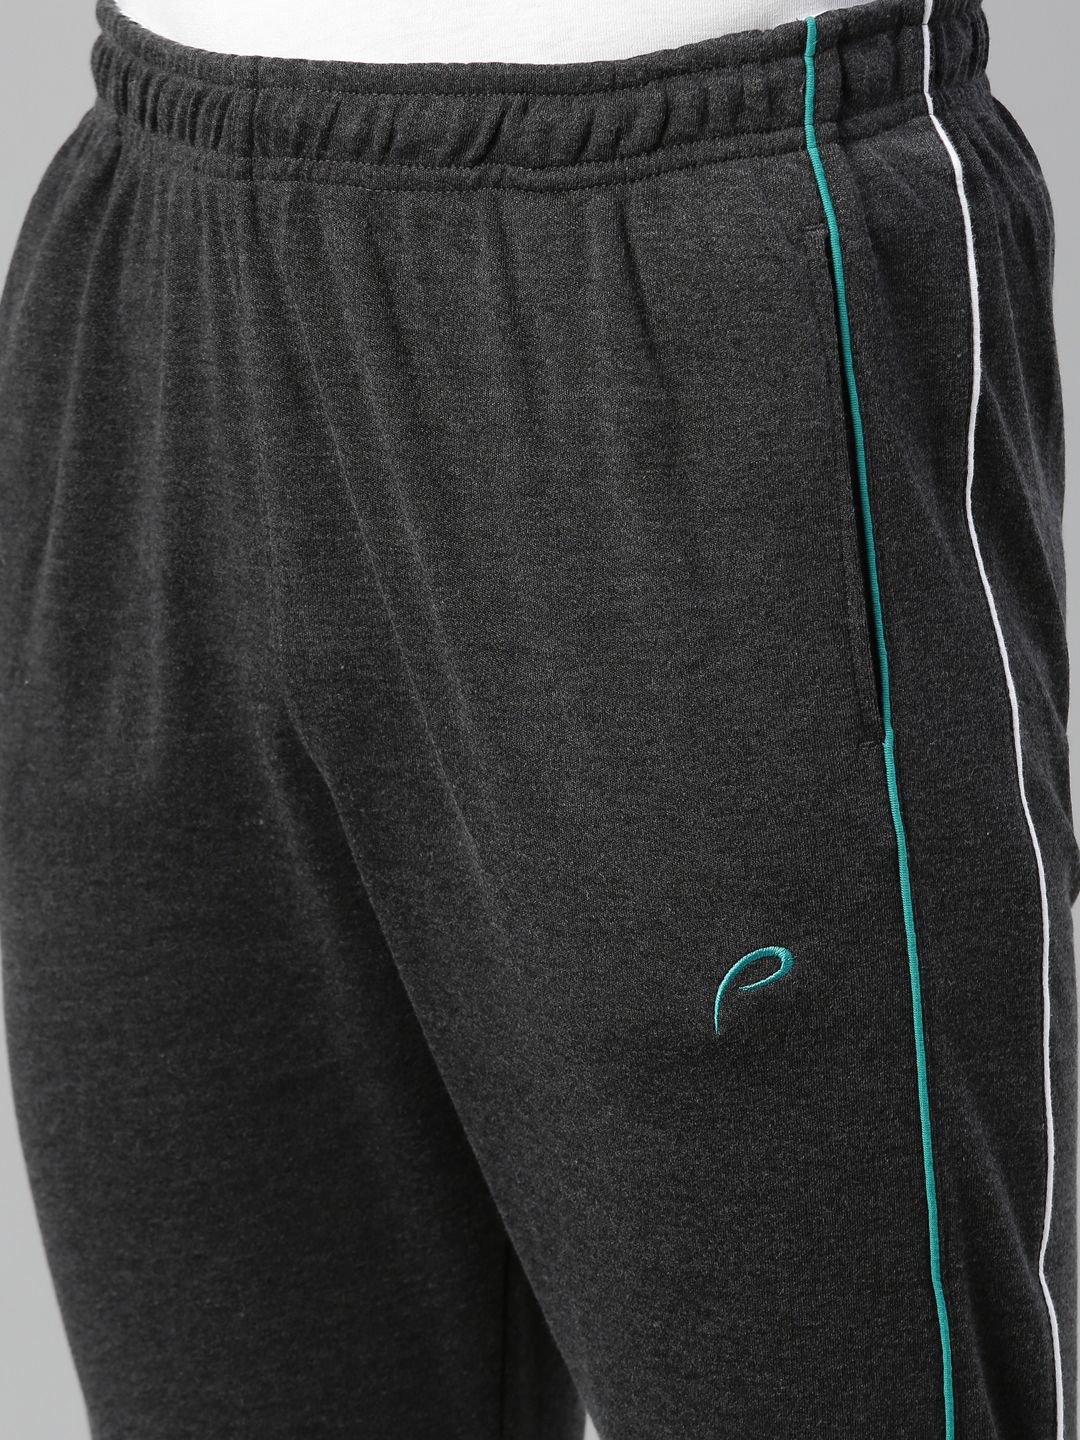 Nike As Dri Fit Stretch Woven Black Training Track Pants for men price   Best buy price in India August 2023 detail  trends  PriceHunt